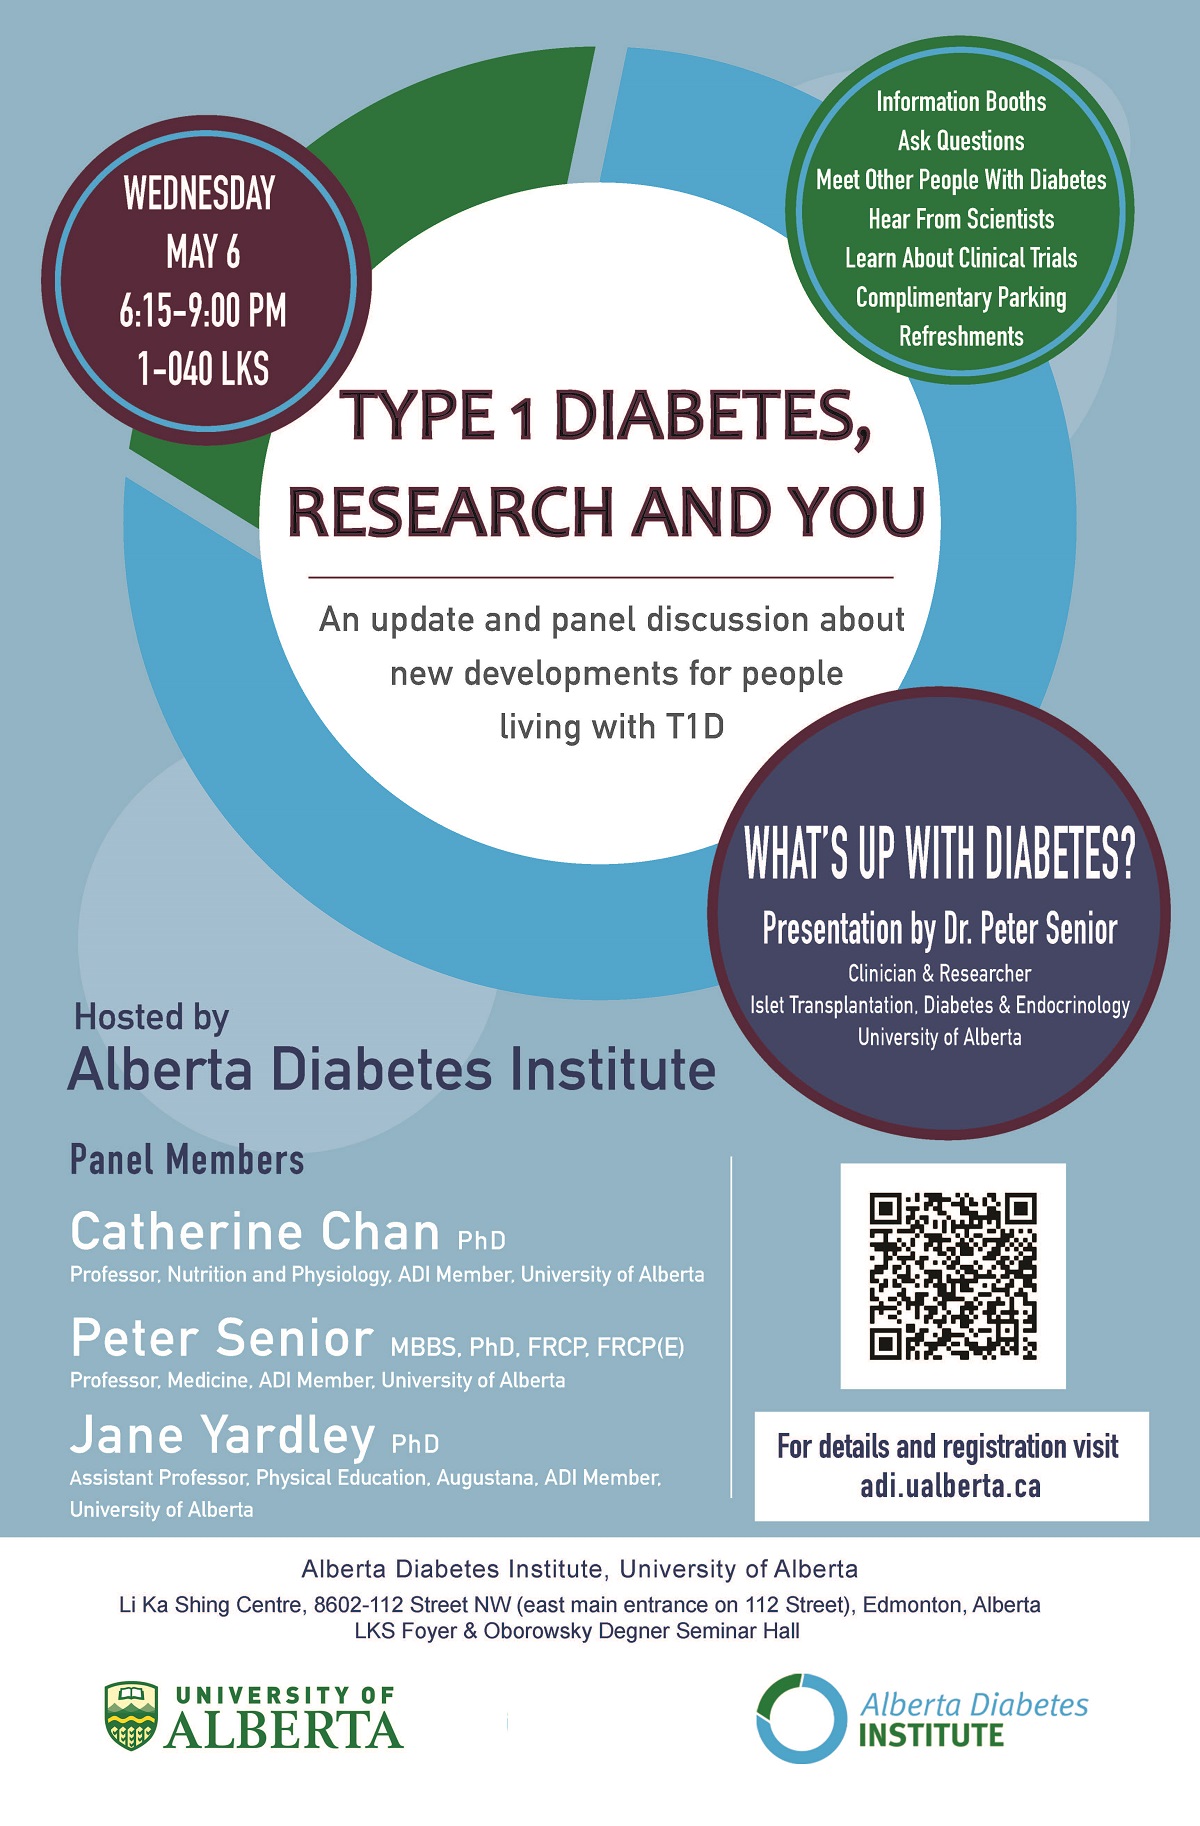 new research type 1 diabetes